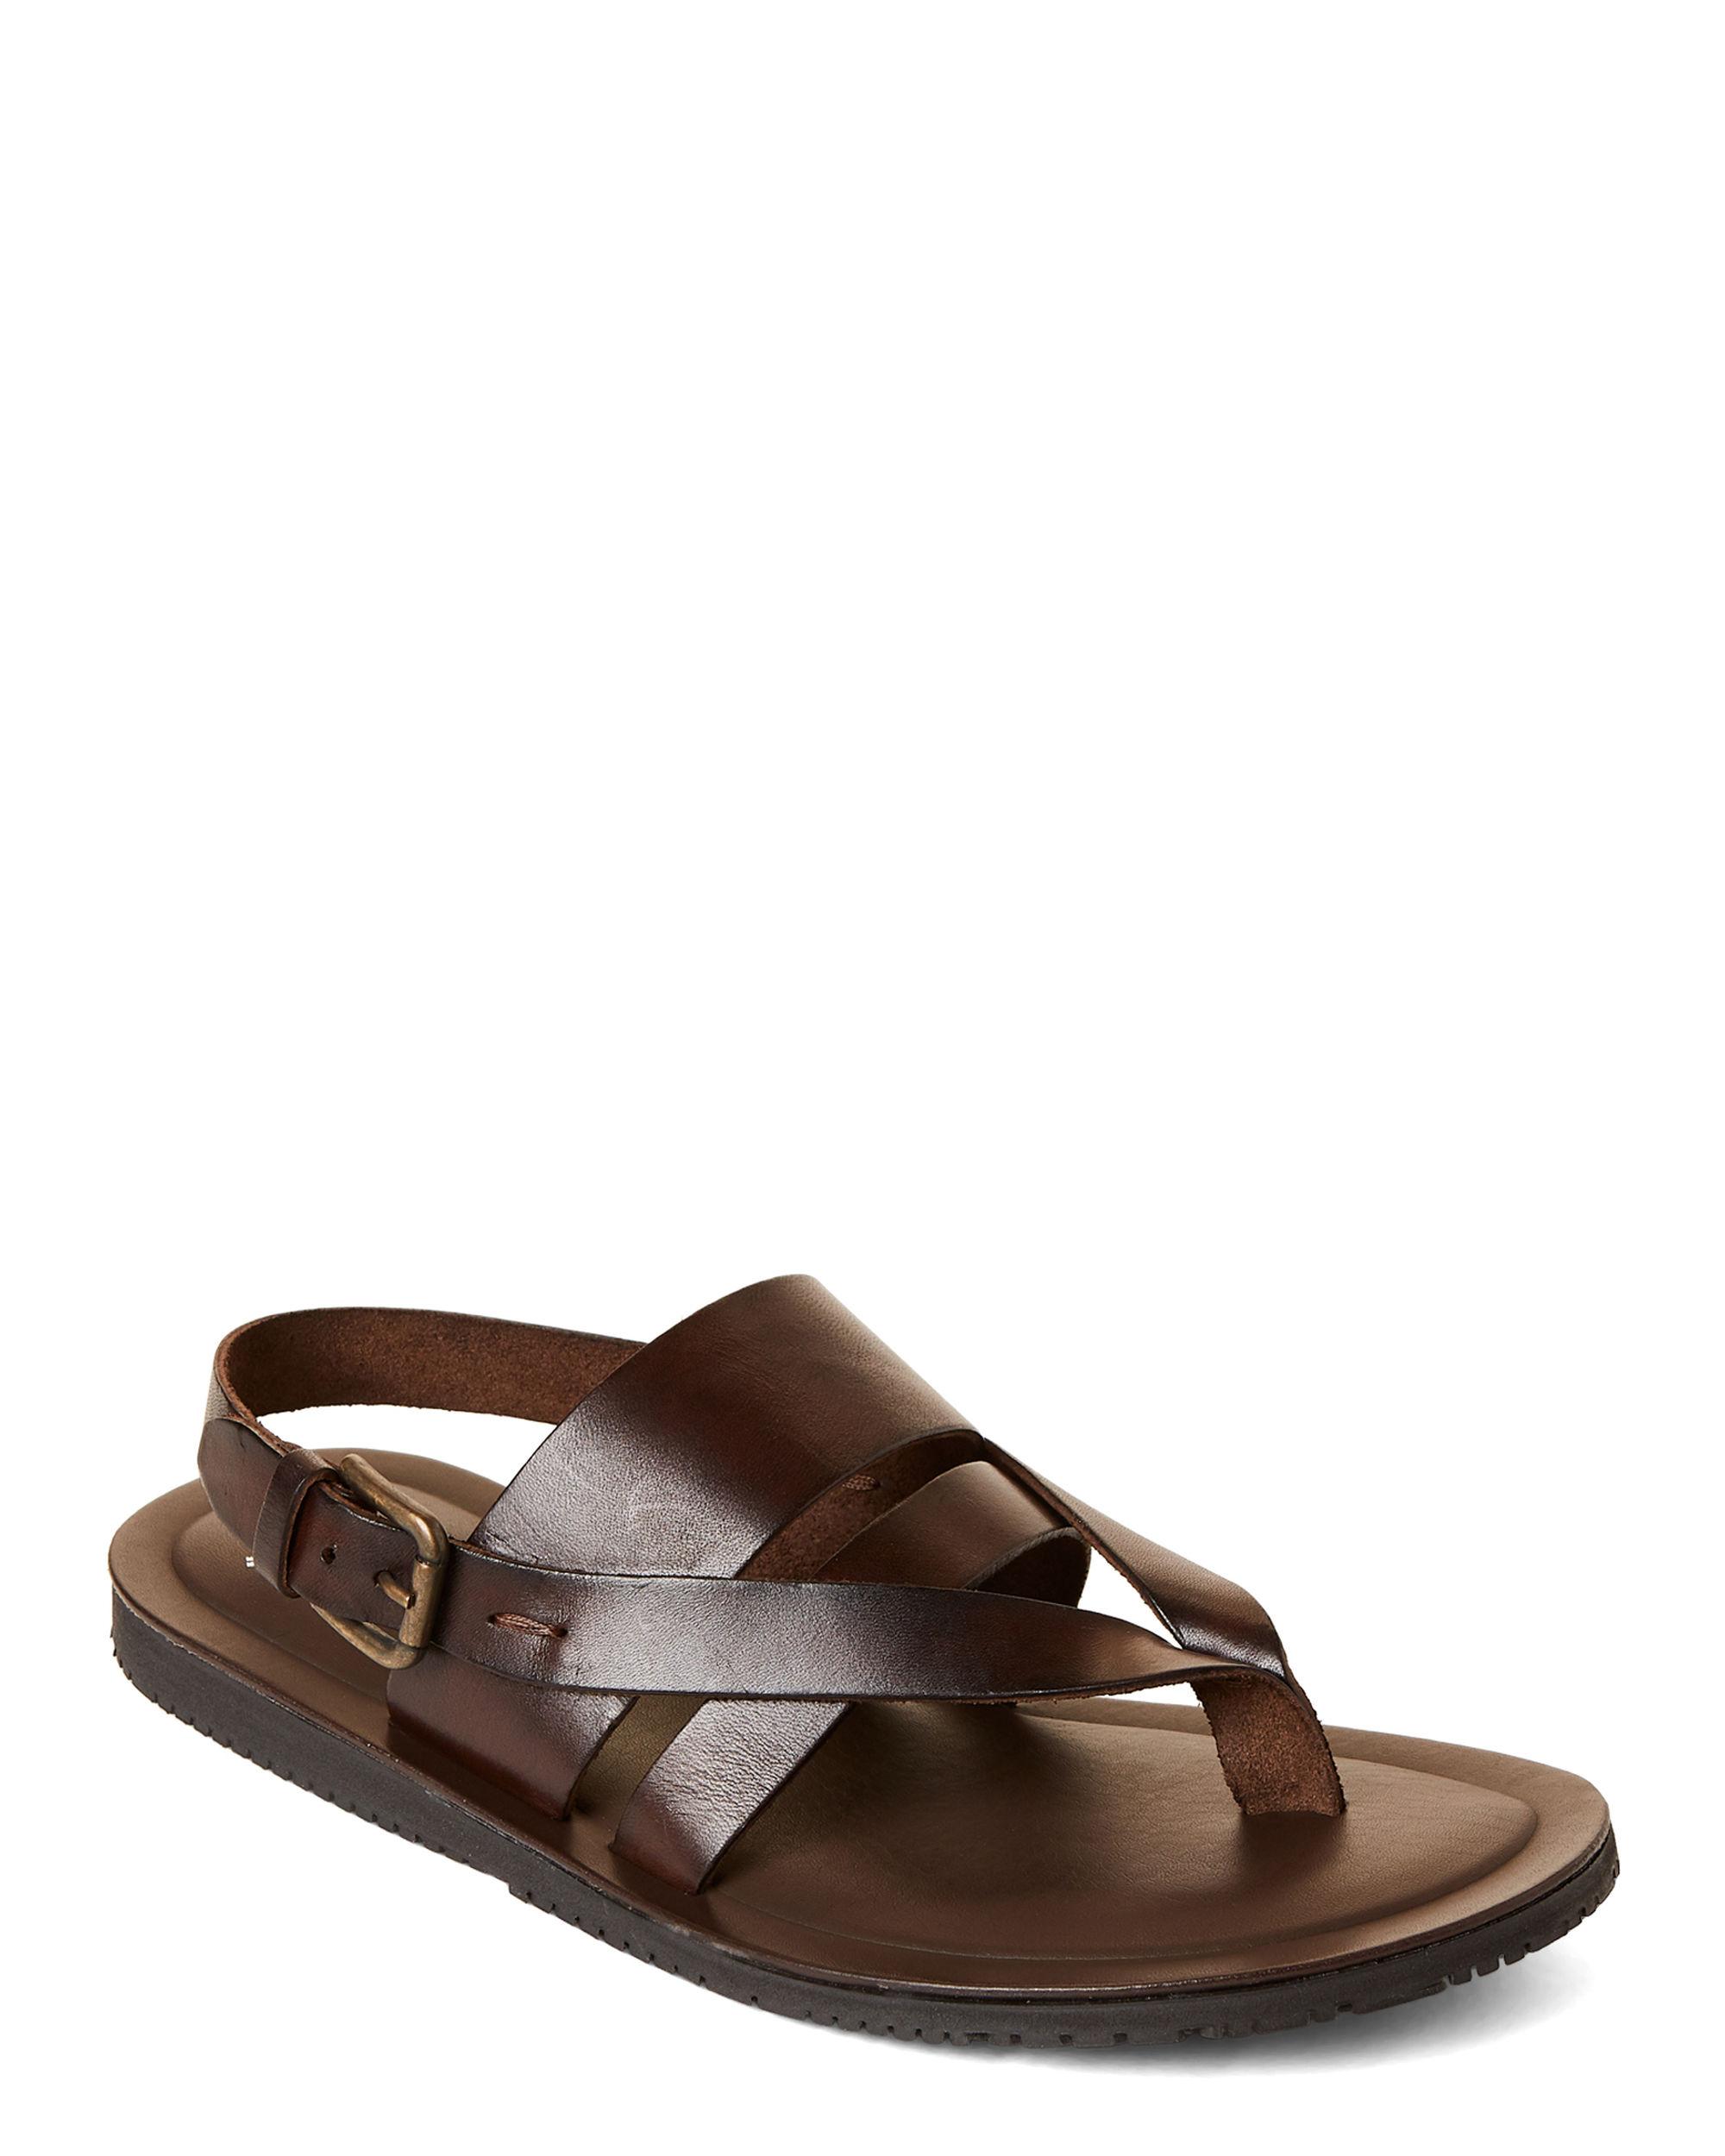 Kenneth Cole Brown Reel-ist Leather Sandals in Brown for Men - Lyst